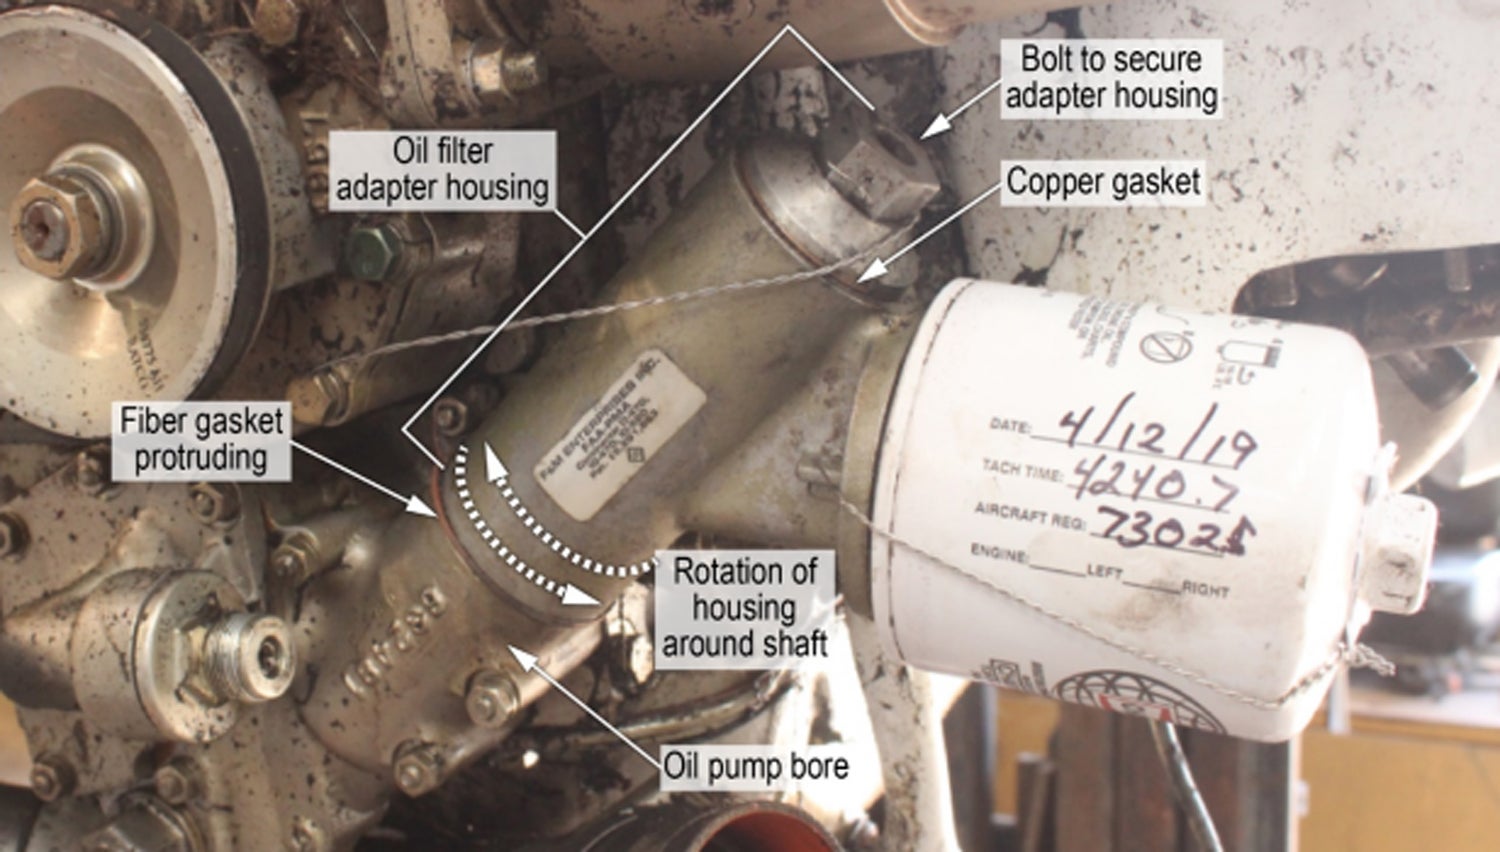 NTSB Issues Safety Recommendation on F&amp;M Oil Filter Adapters